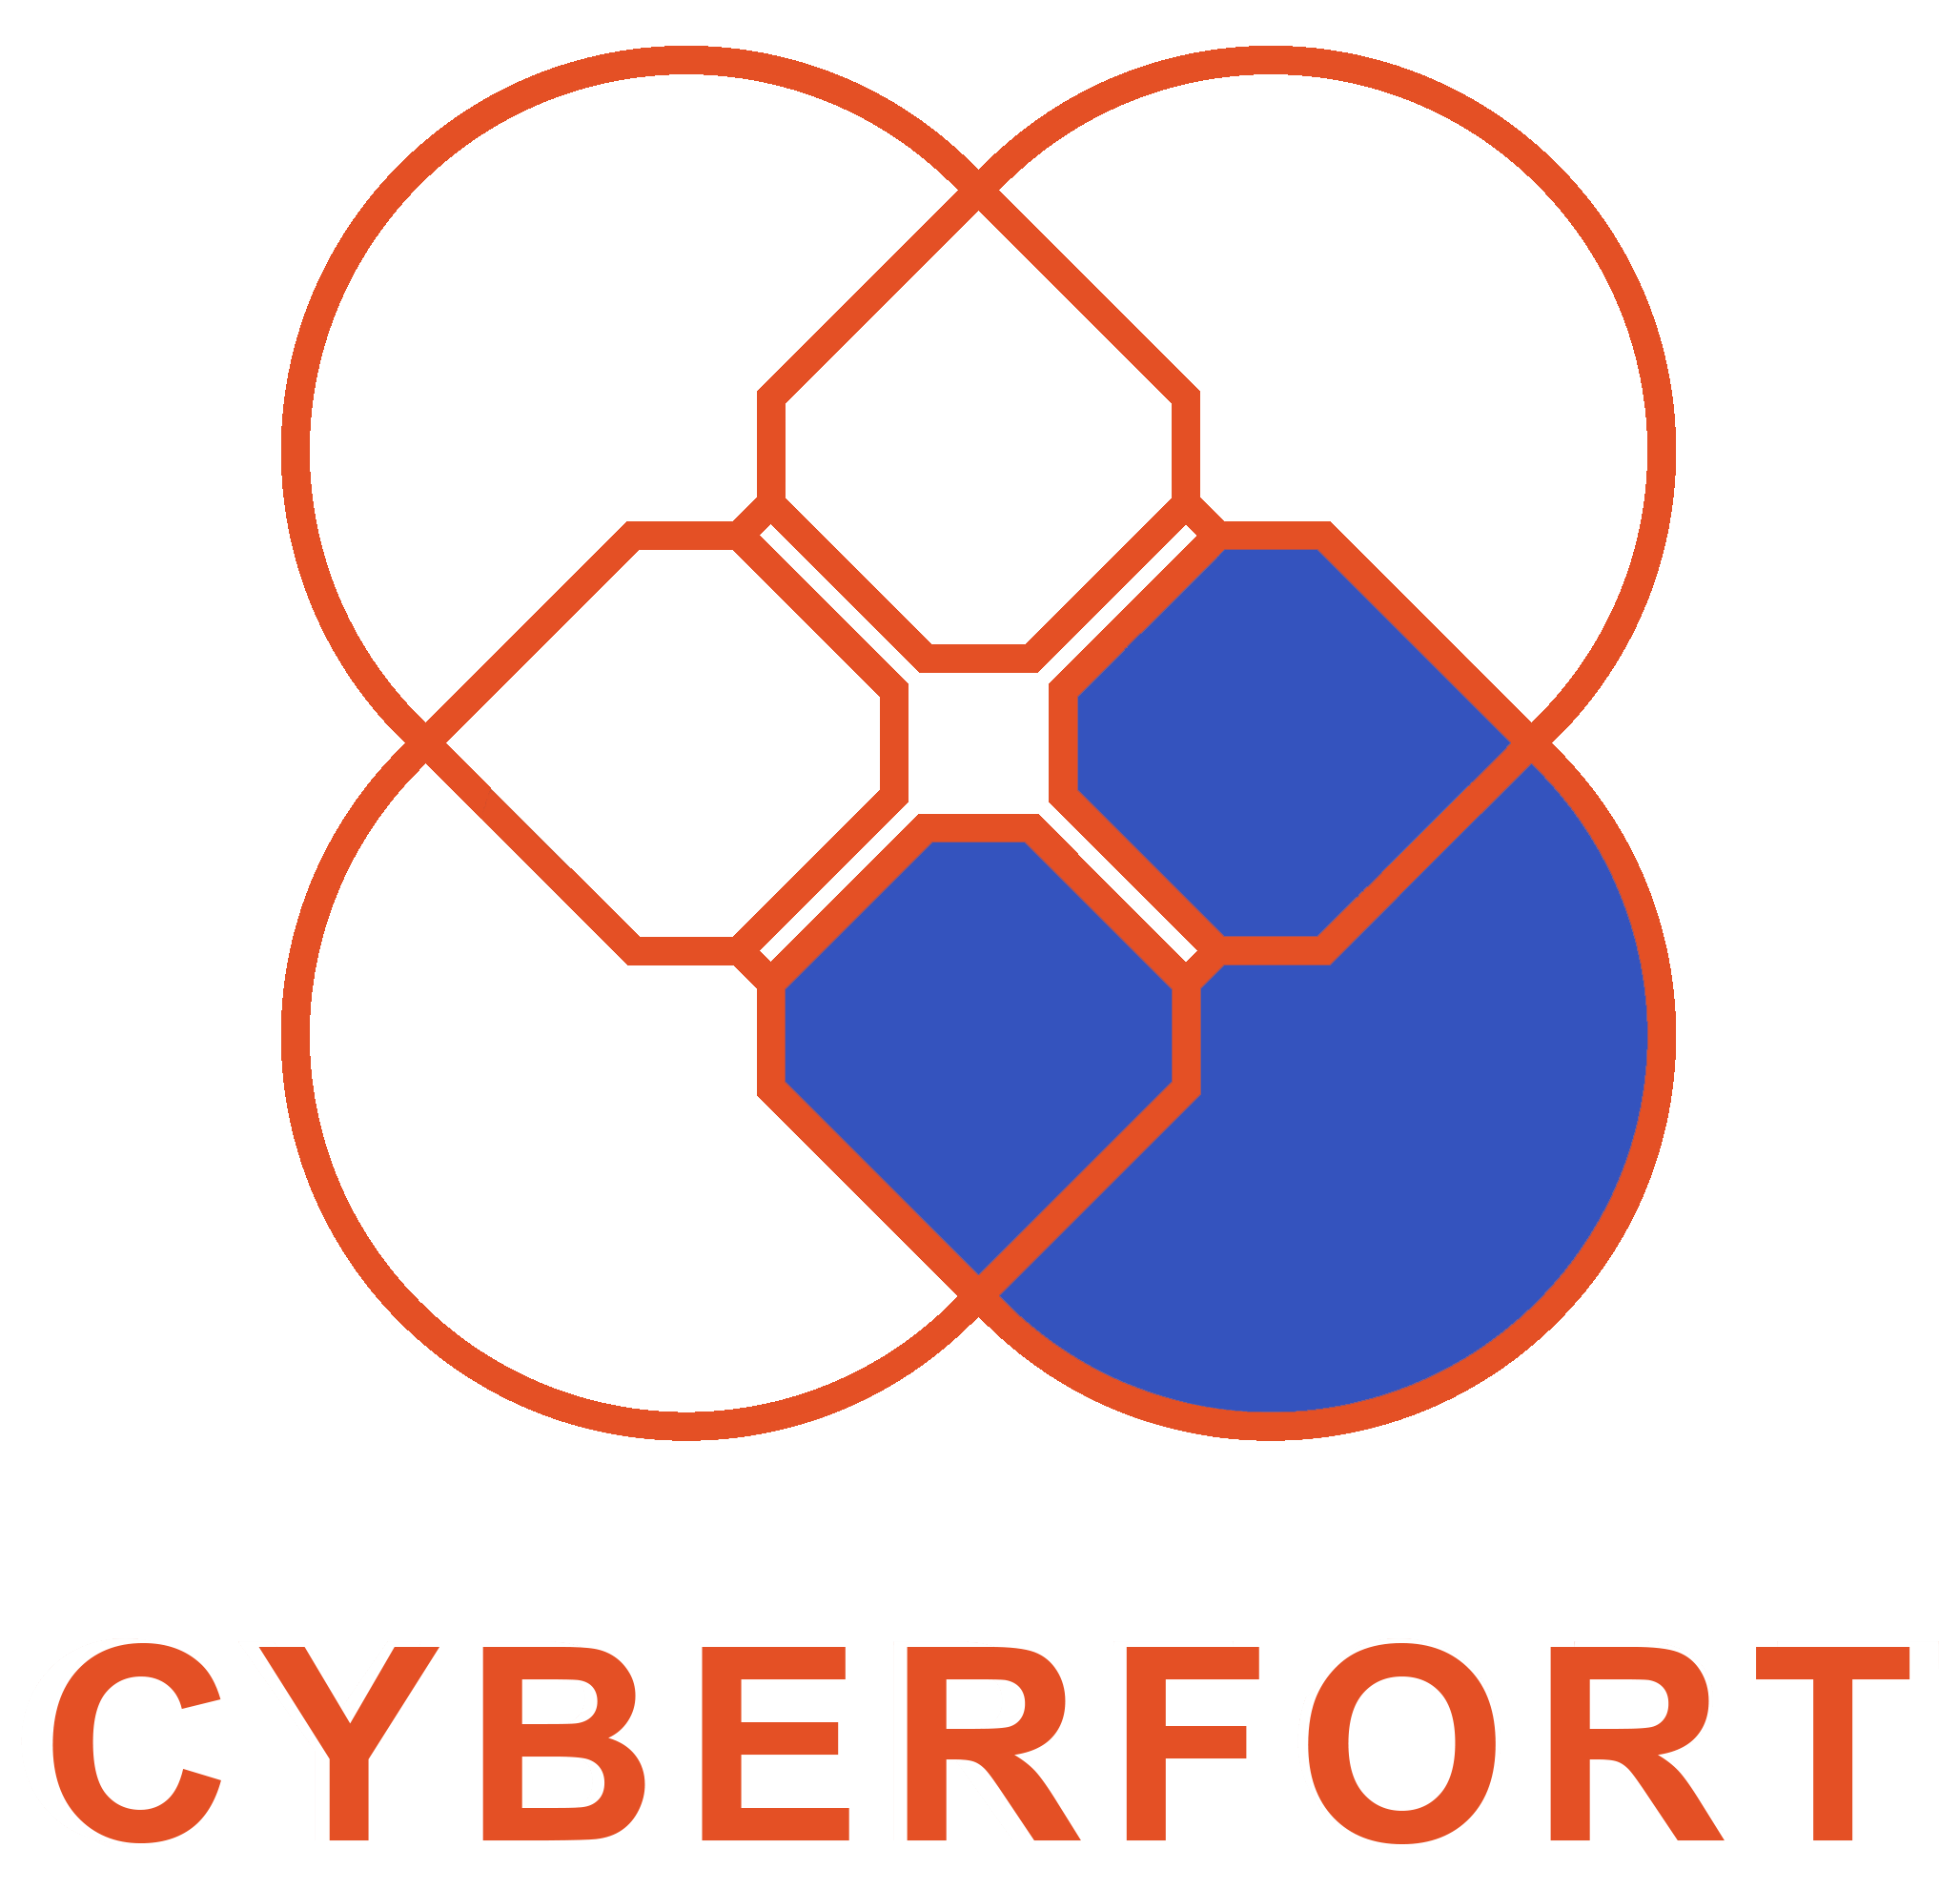 The Cyberfort Group